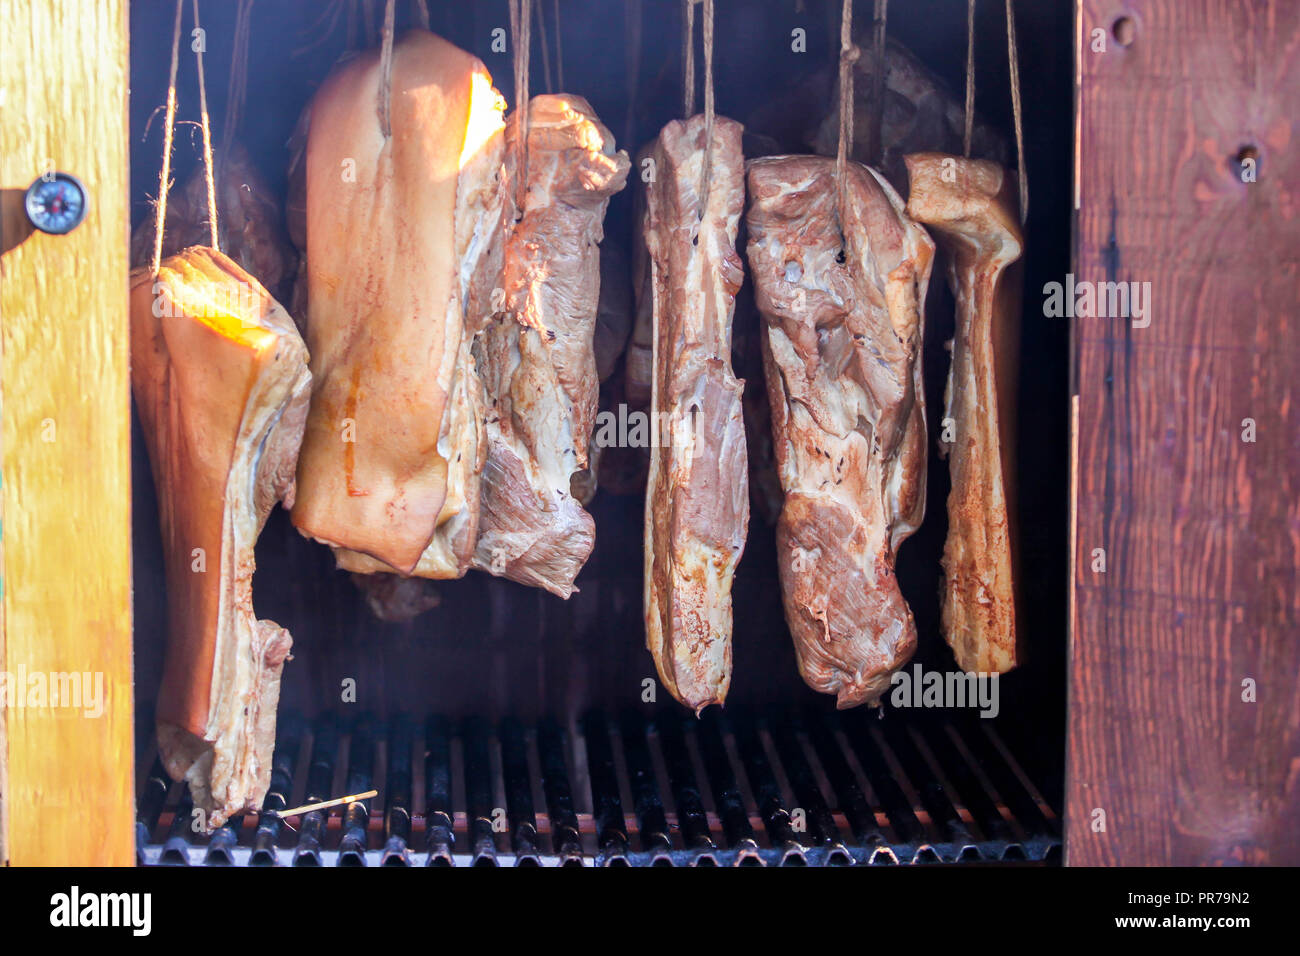 Smoked bacon hanging in wooden smoker Stock Photo